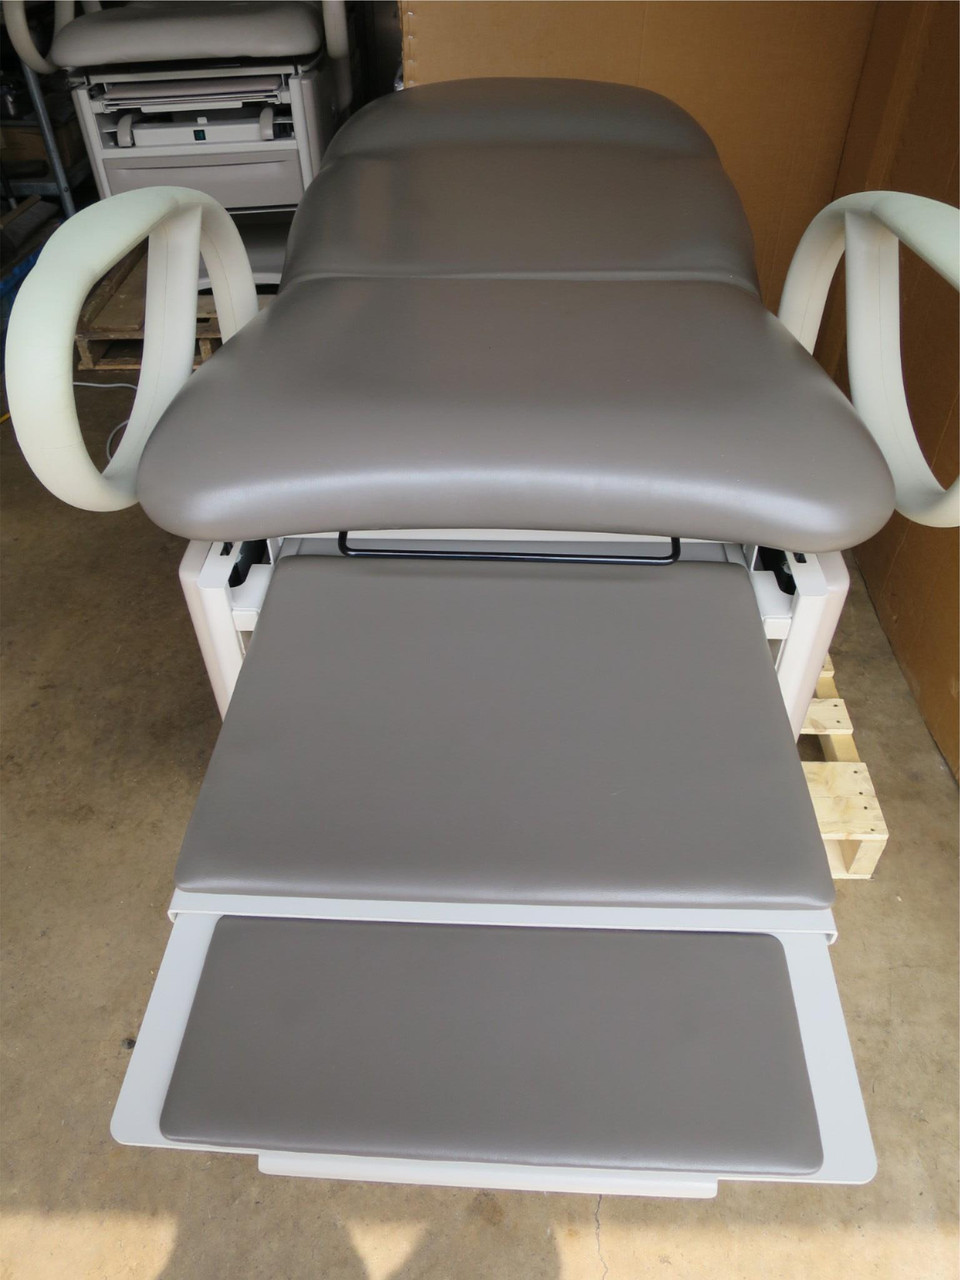 #2 Brewer Access High-Low Power Back Exam Table